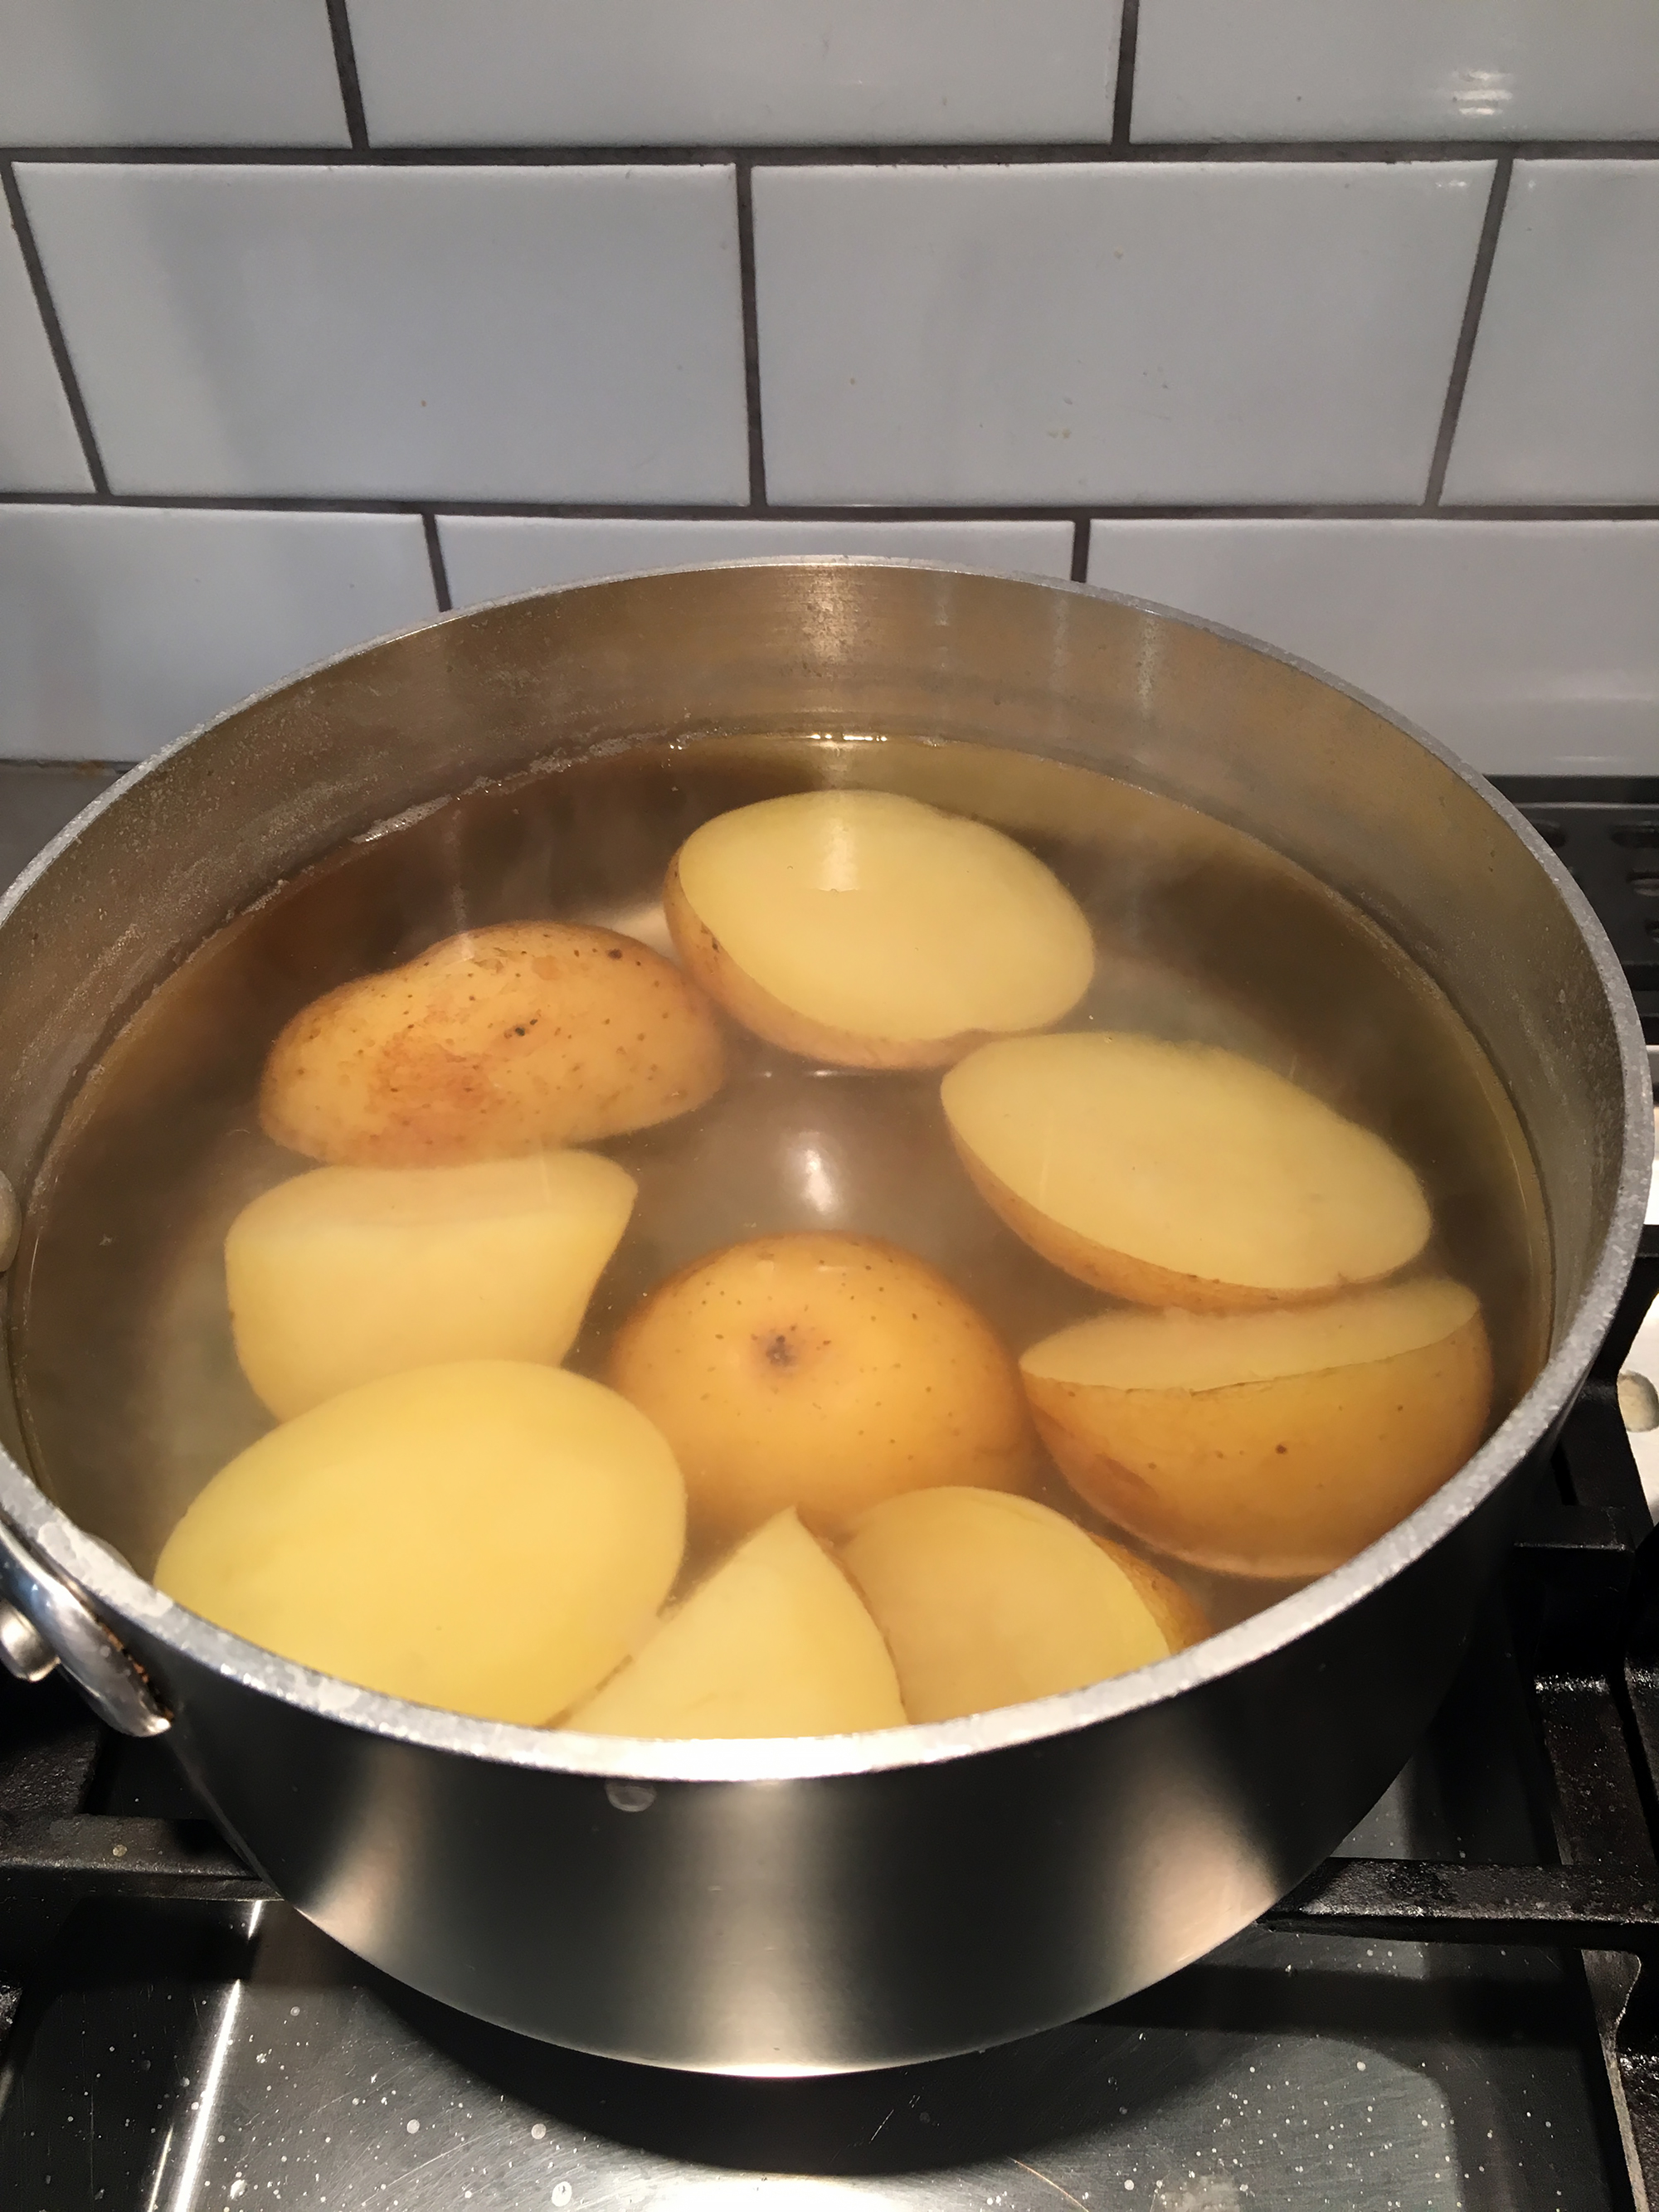 Put the potatoes in a saucepan with cold water to cover, add a few teaspoons kosher salt, then bring to a boil over medium-high heat. Reduce the heat to medium-low to maintain a simmer and cook until tender, about 20 minutes. 